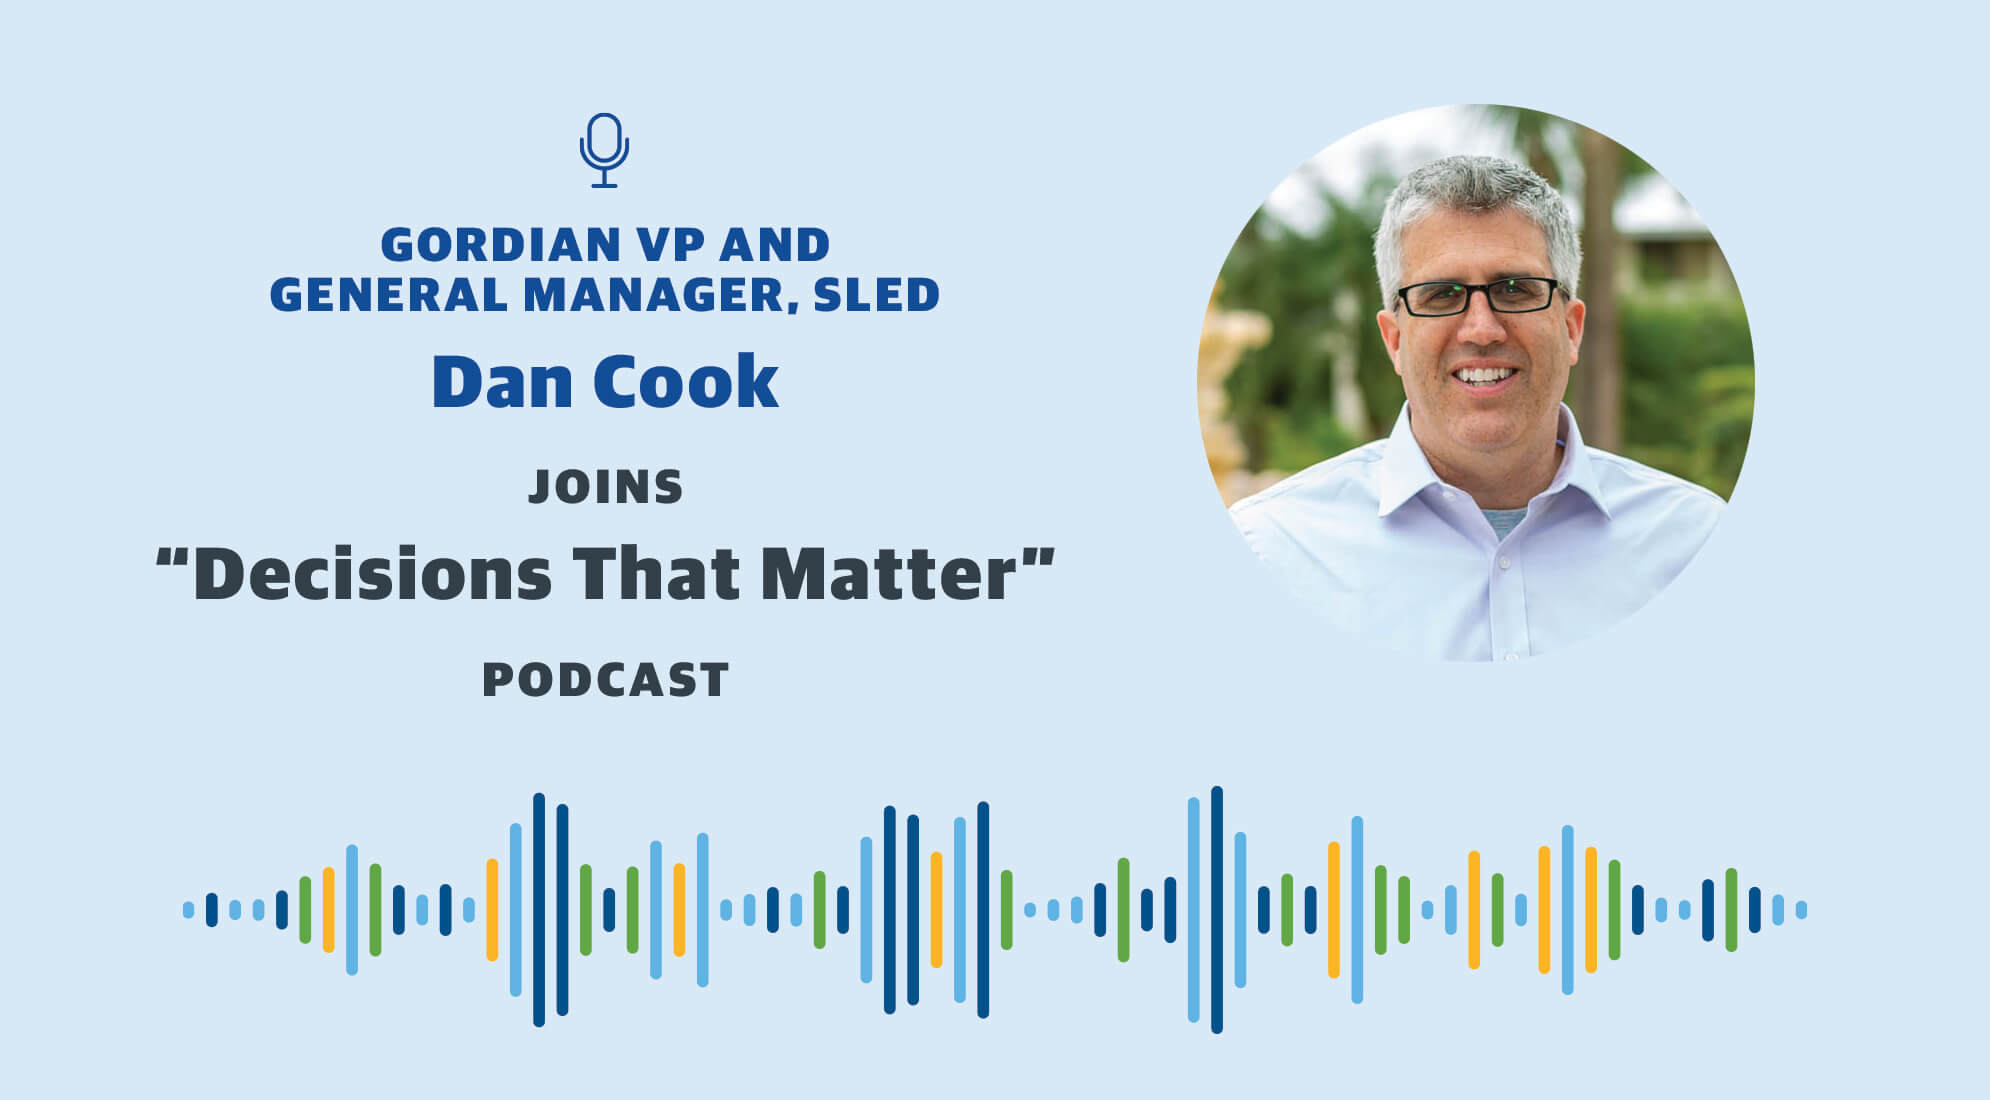 Gordian VP and GM of SLED Dan Cook joins "Decisions That Matter" podcast